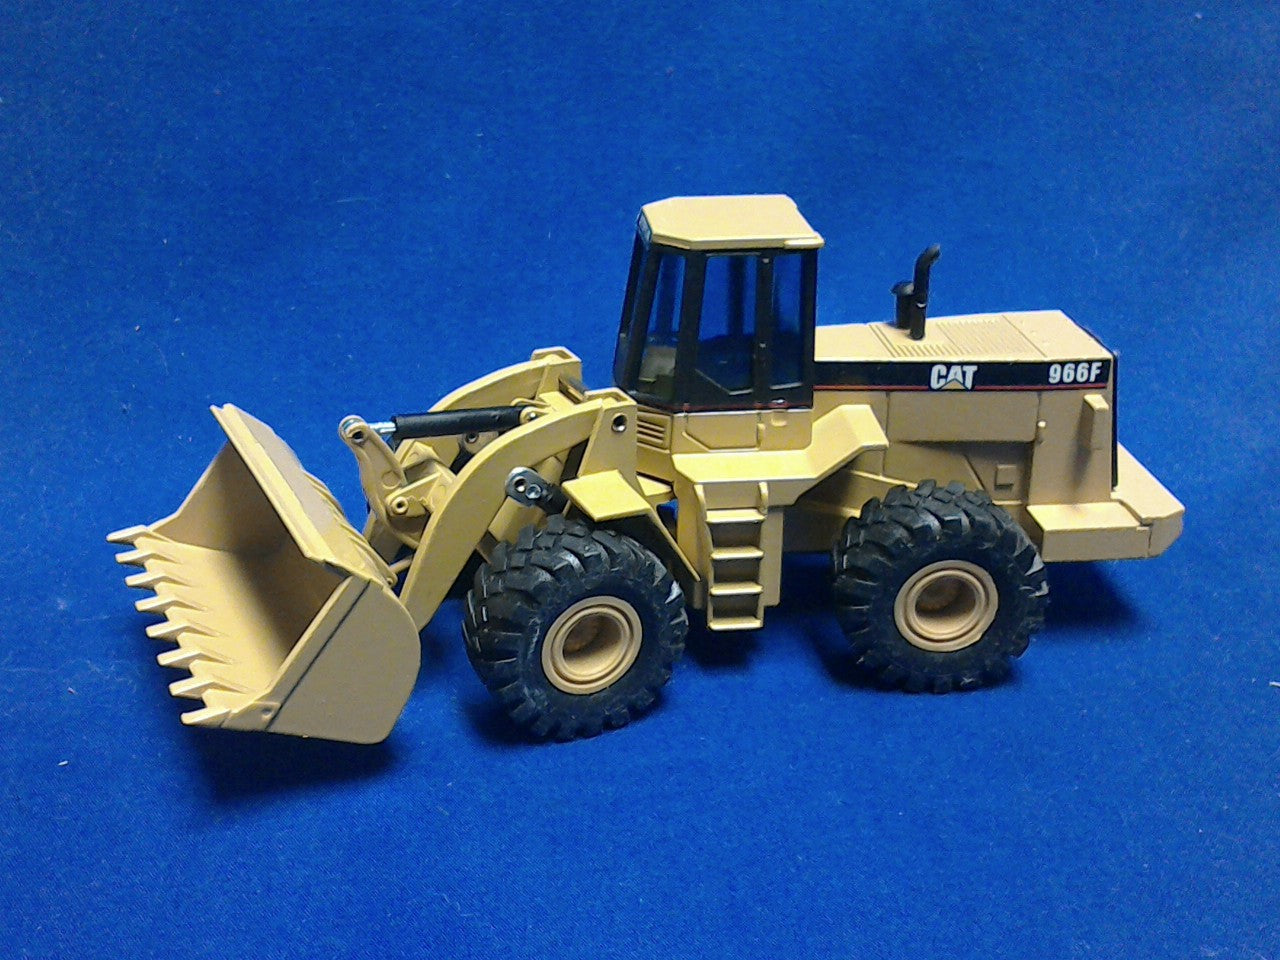 237 Caterpillar 966F Wheel Loader 1:50 Scale (Discontinued Model)